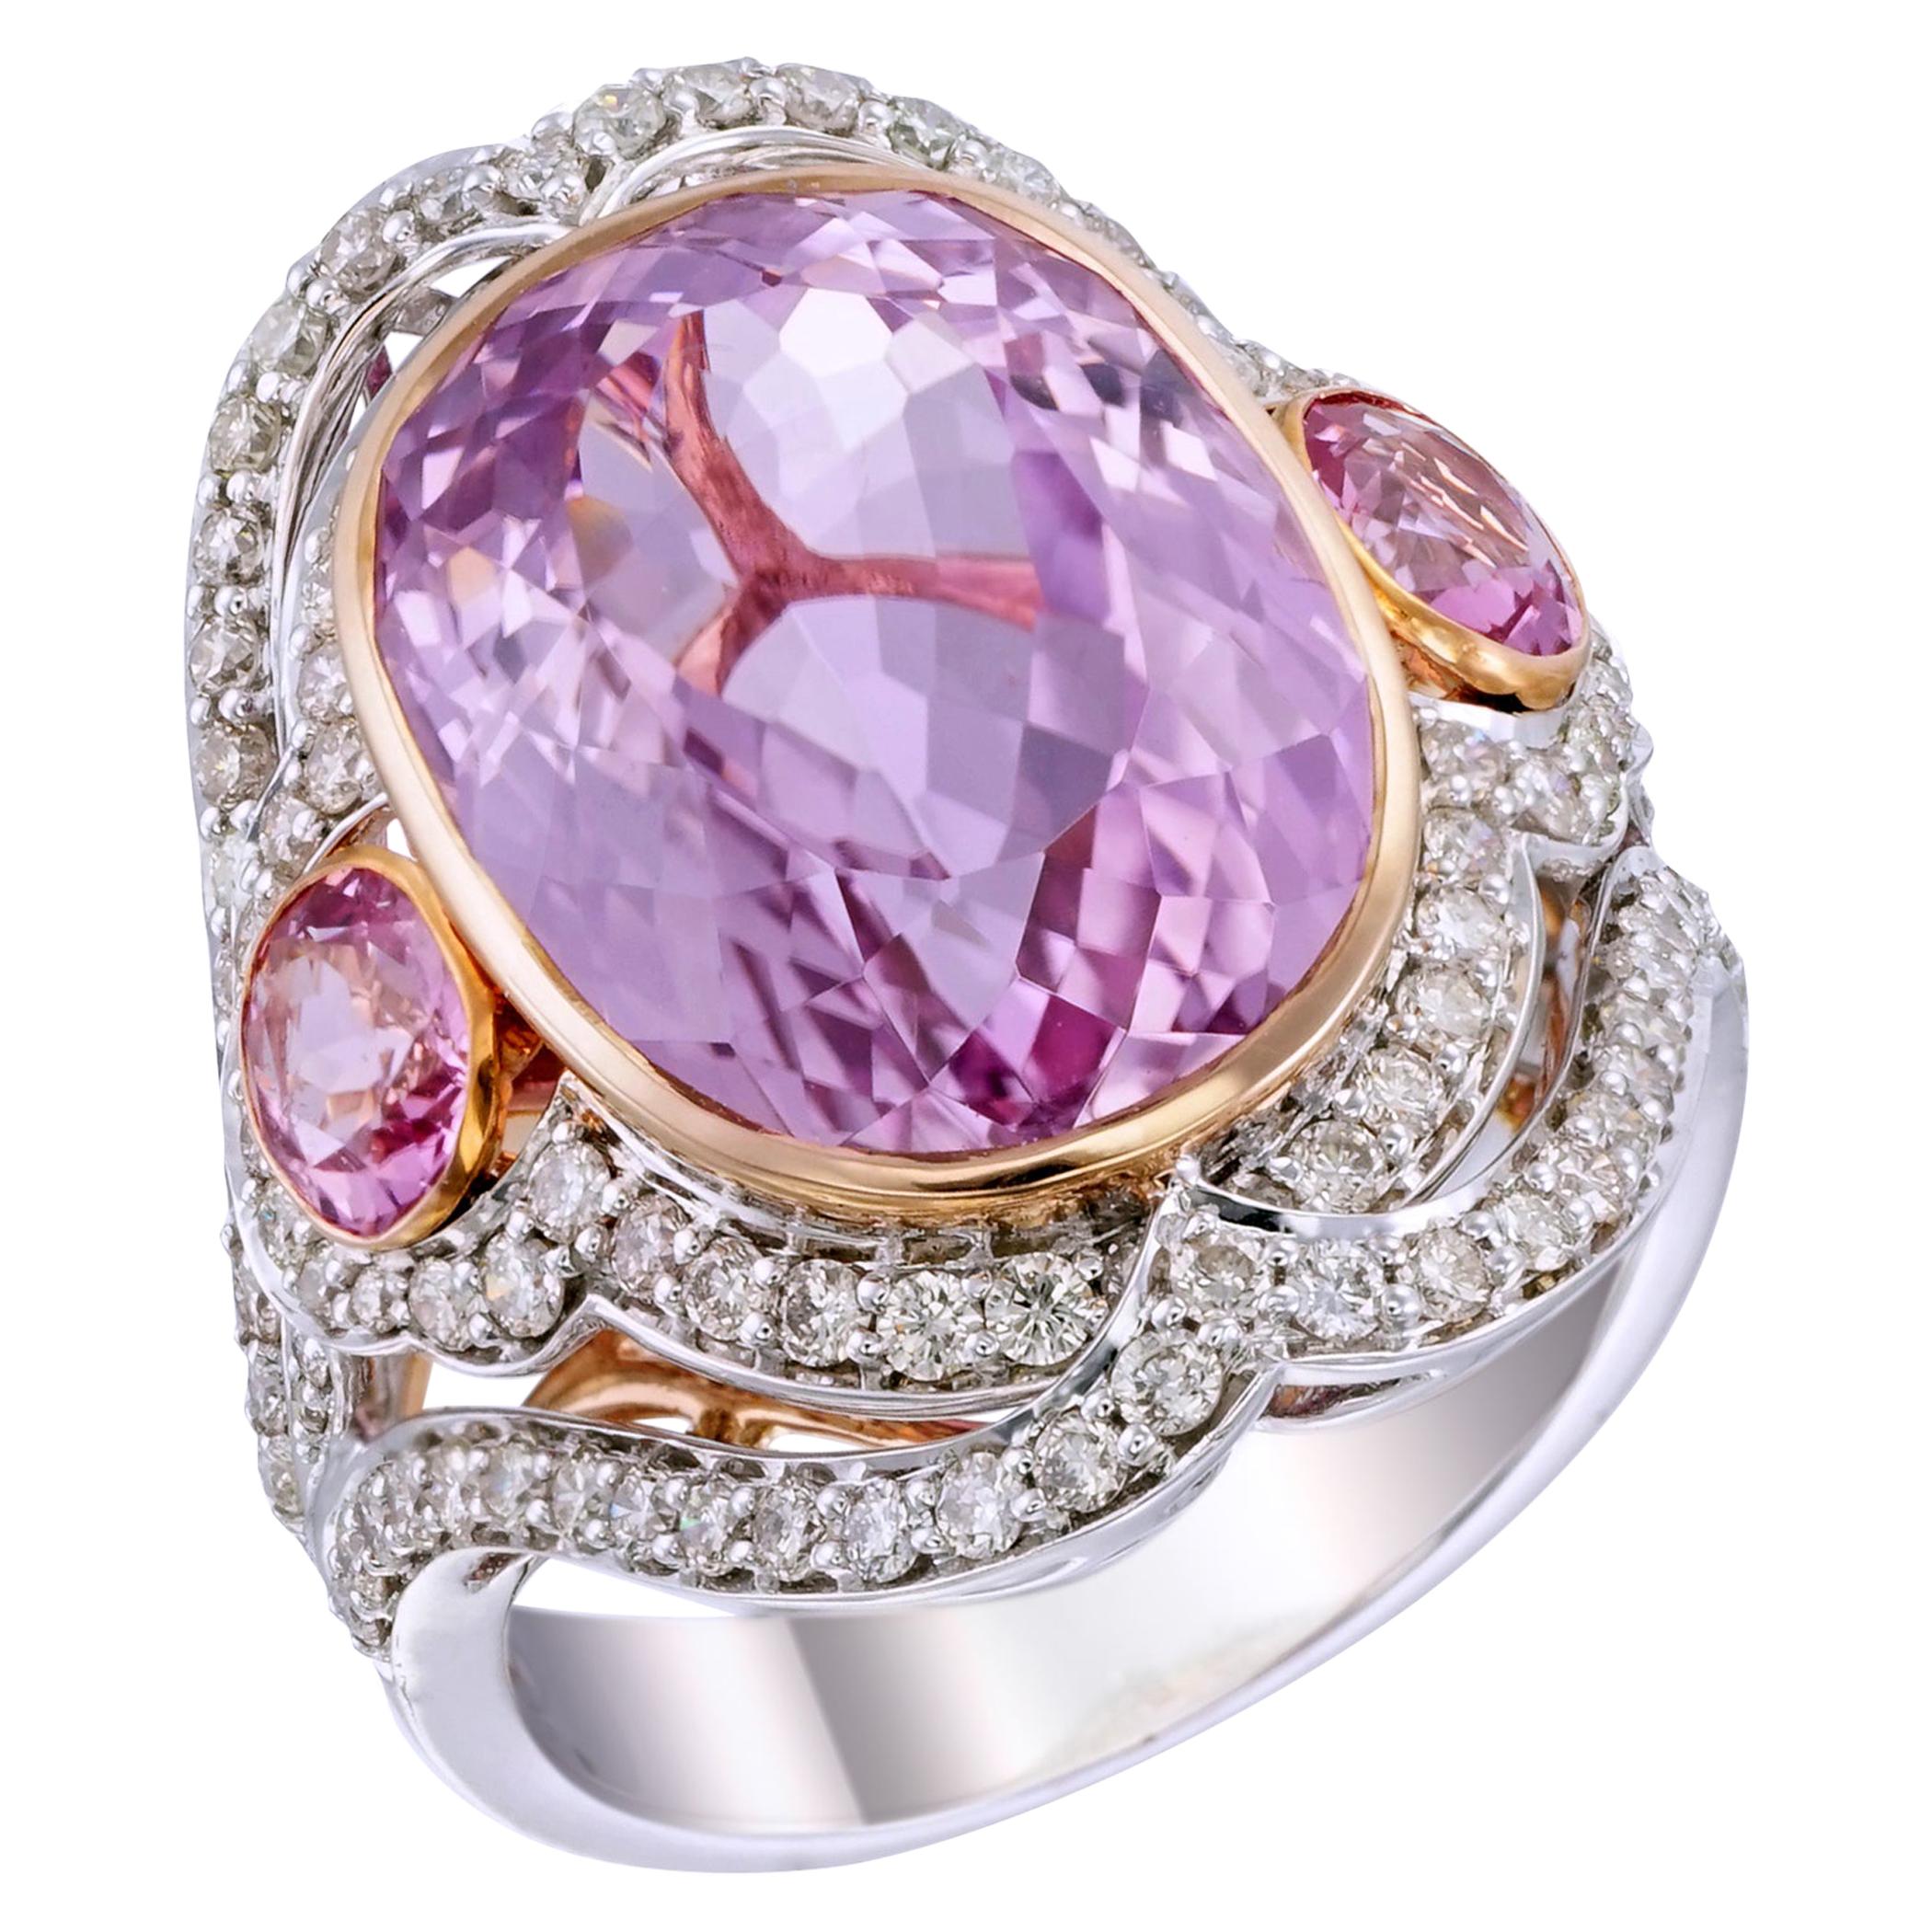 Zorab Creation 14 Carat Pretty in Pink Kunzite Ring For Sale at 1stDibs